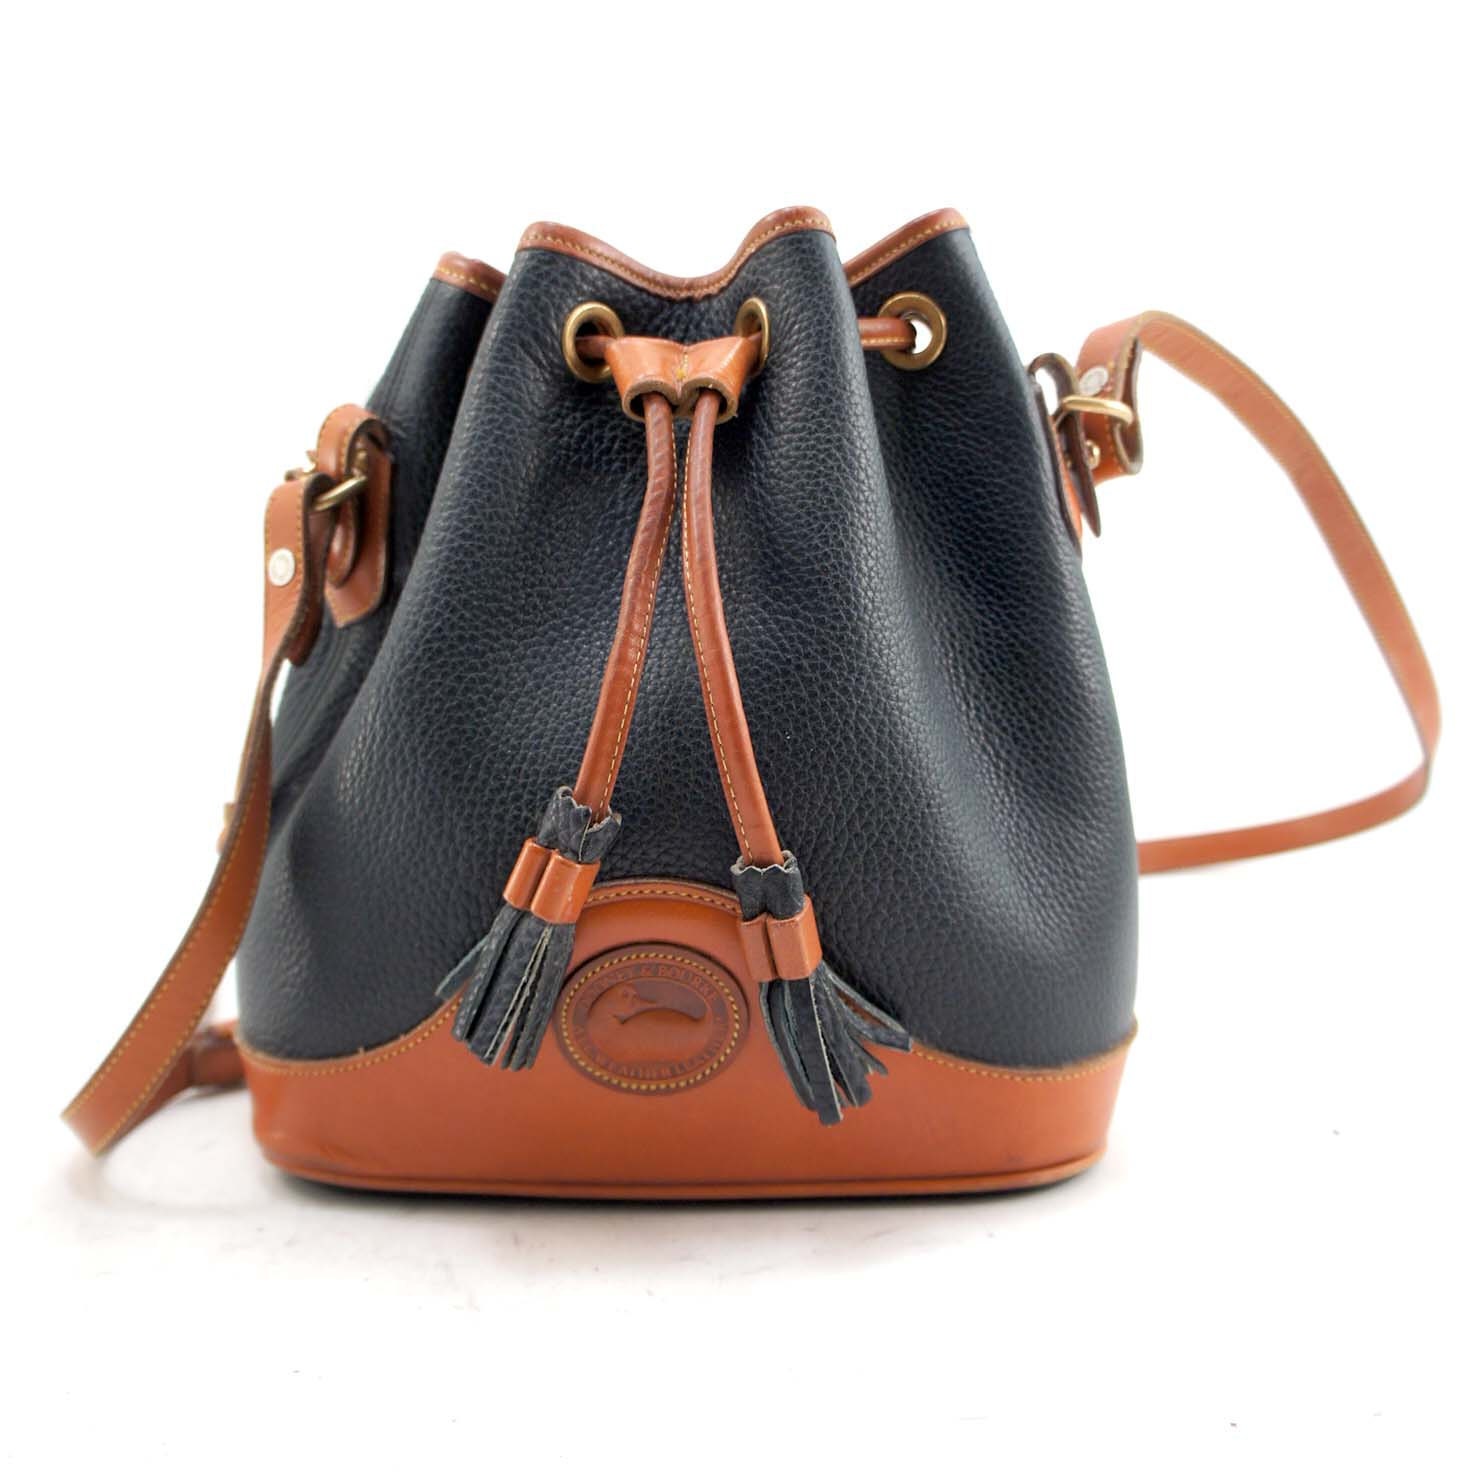 Dooney and Bourke Bucket Bag in All Weather Blue Pebbled